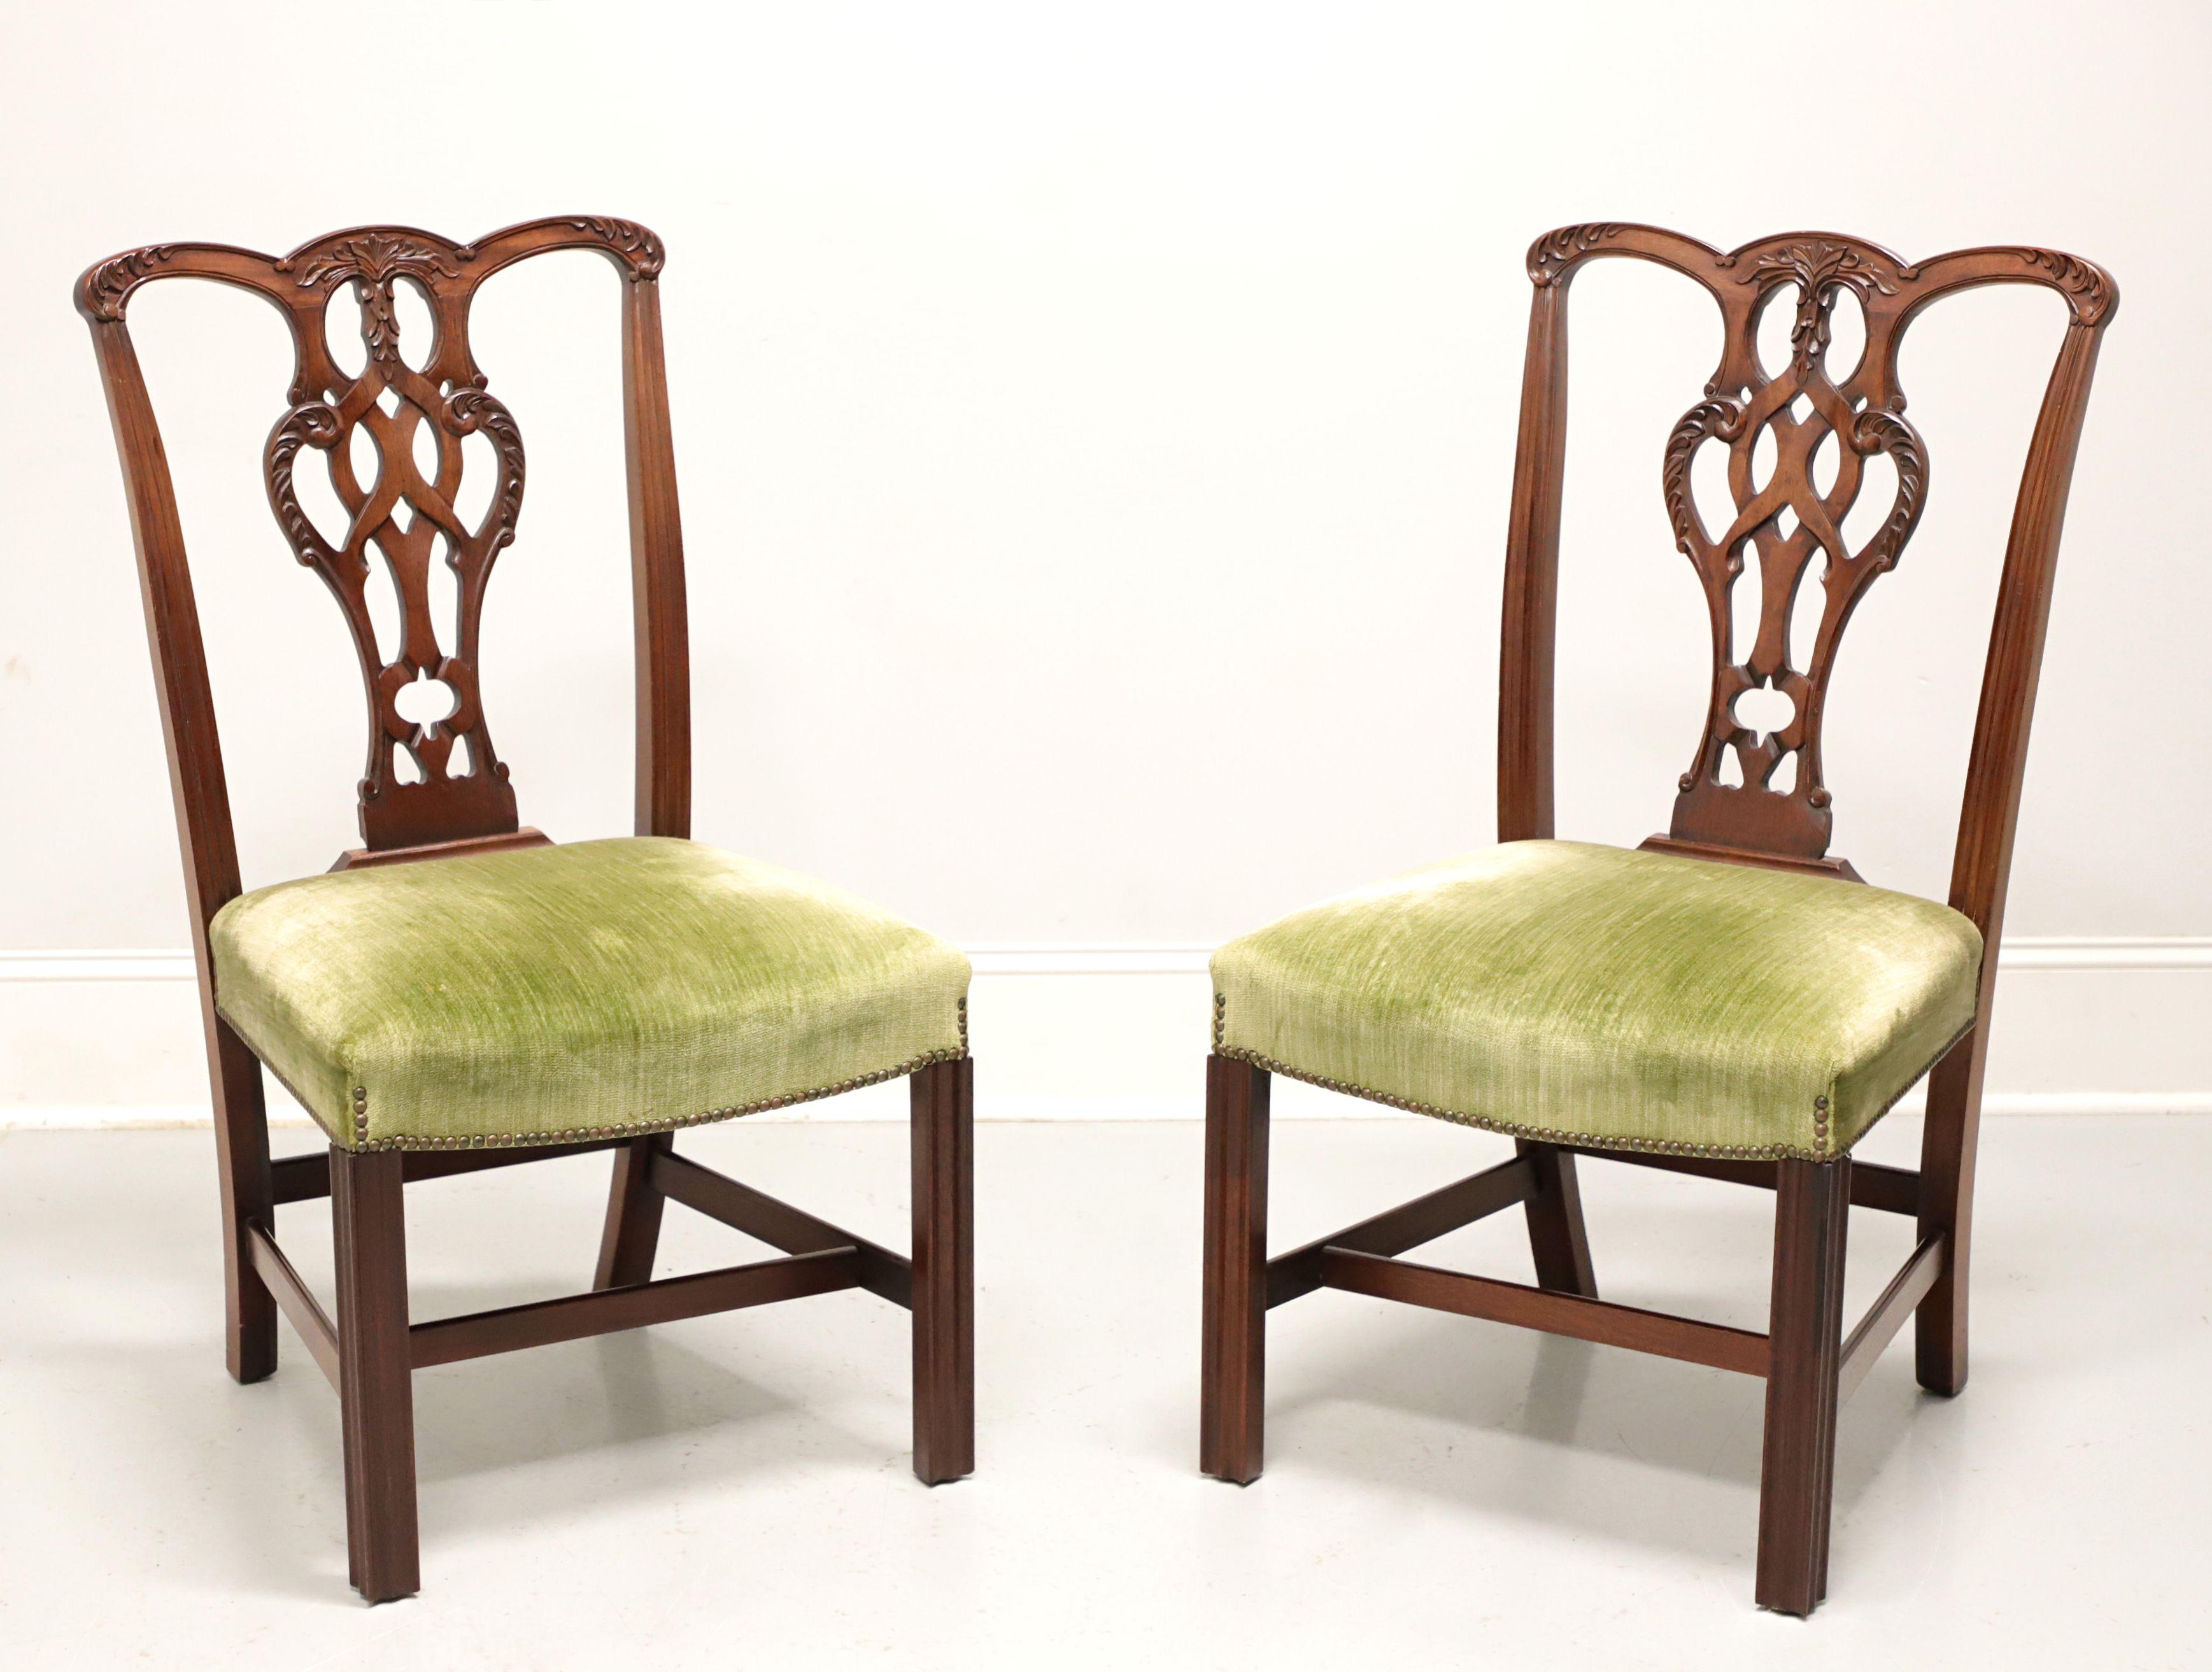 CRAFTIQUE Mahogany Chippendale Style Straight Leg Dining Side Chairs - Pair C For Sale 4